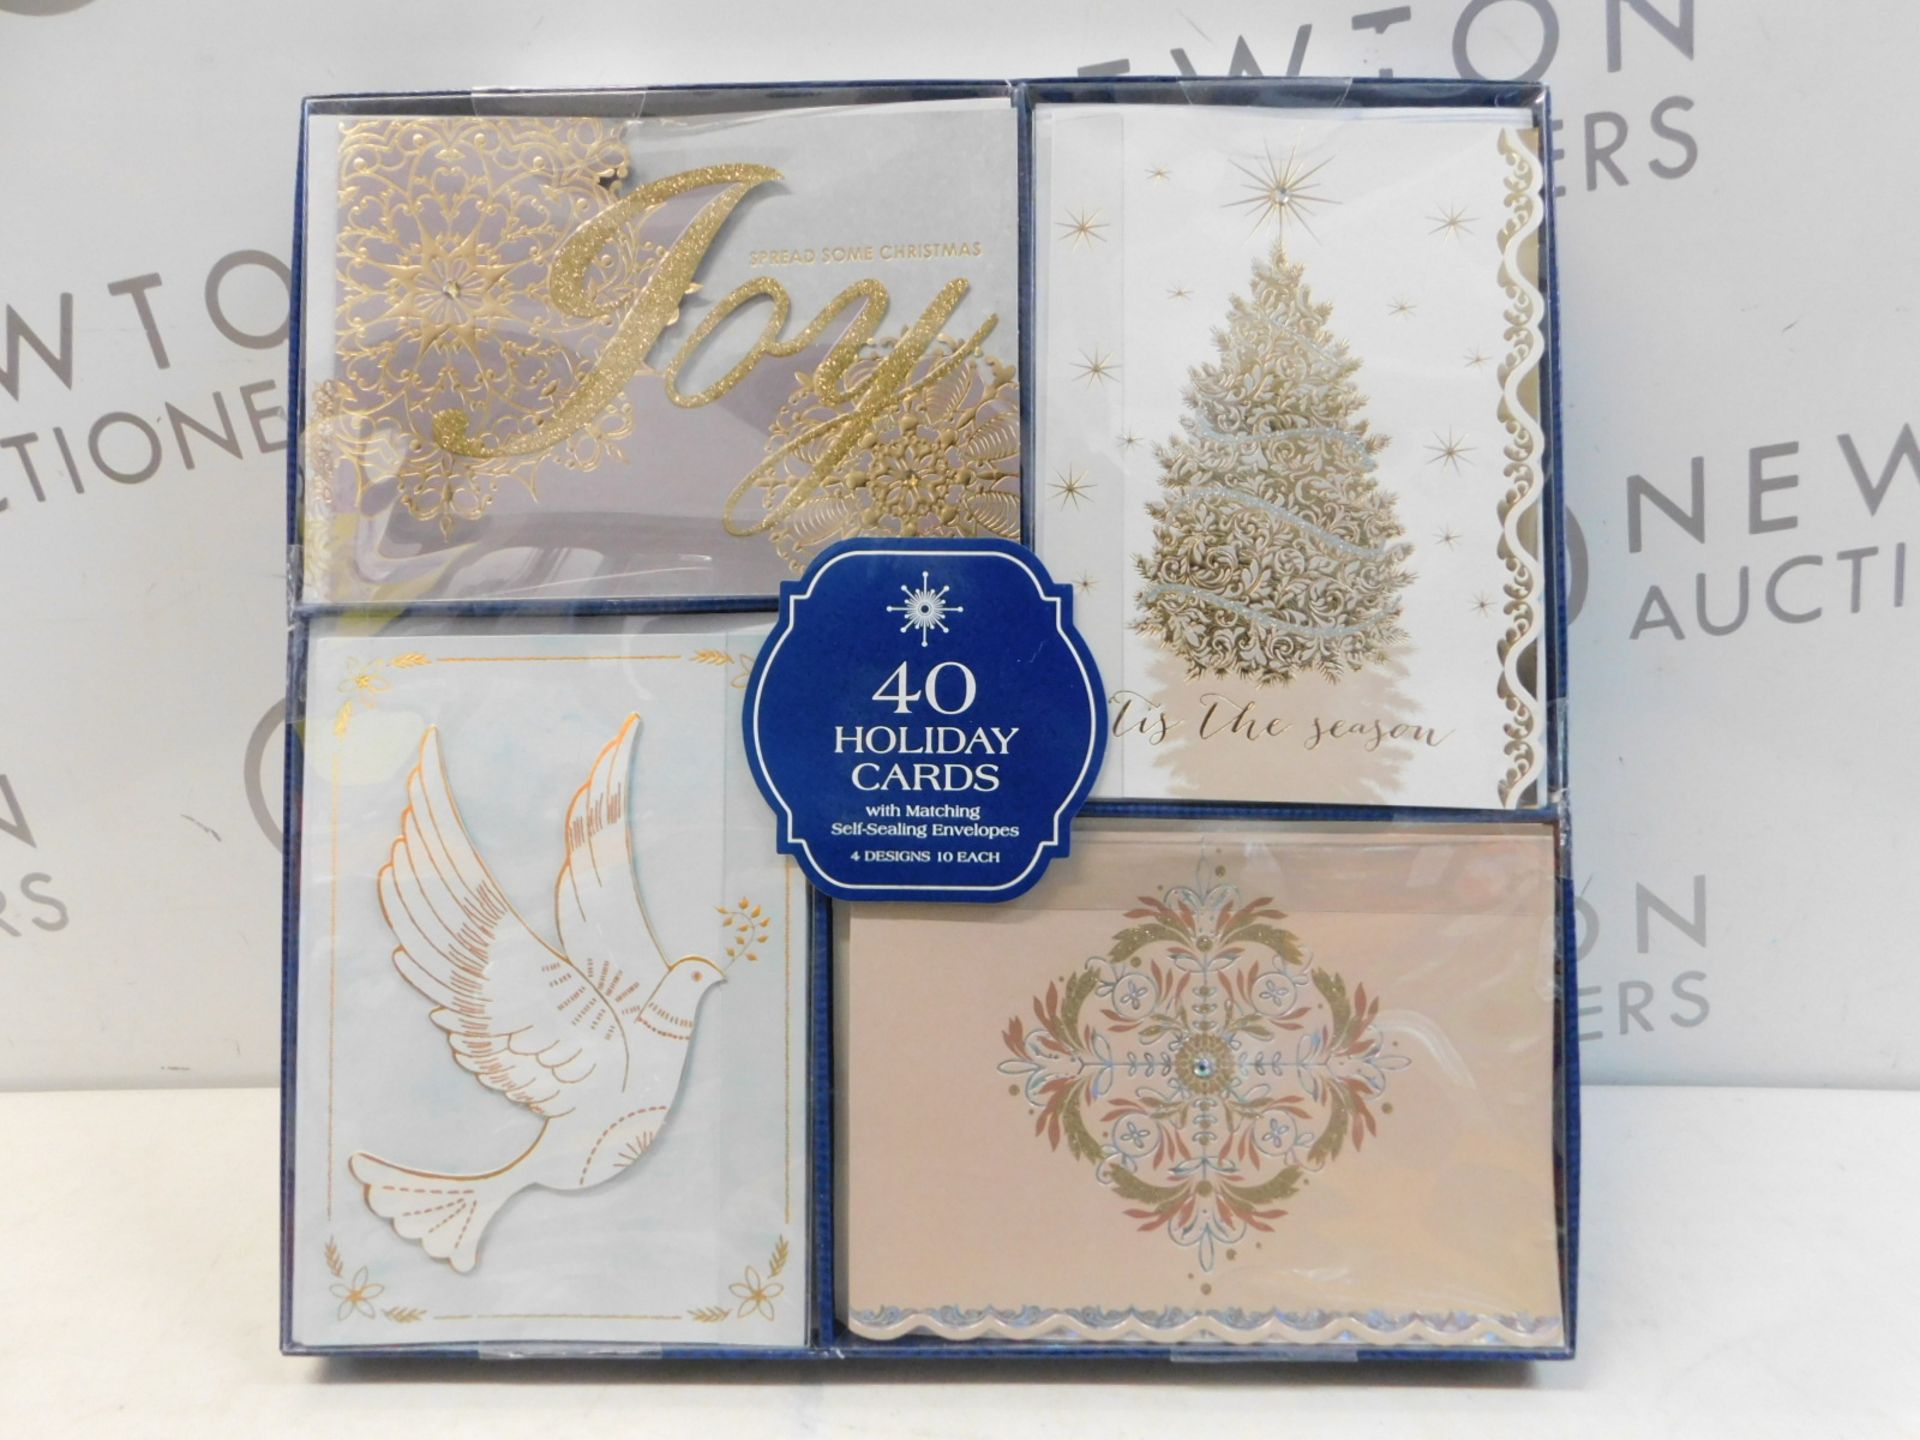 1 BRAND NEW SEALED BOX OF HALLMARK 40 CHRISTMAS CARDS WITH MATCHING SELF- SEALING ENVELOPES RRP Â£